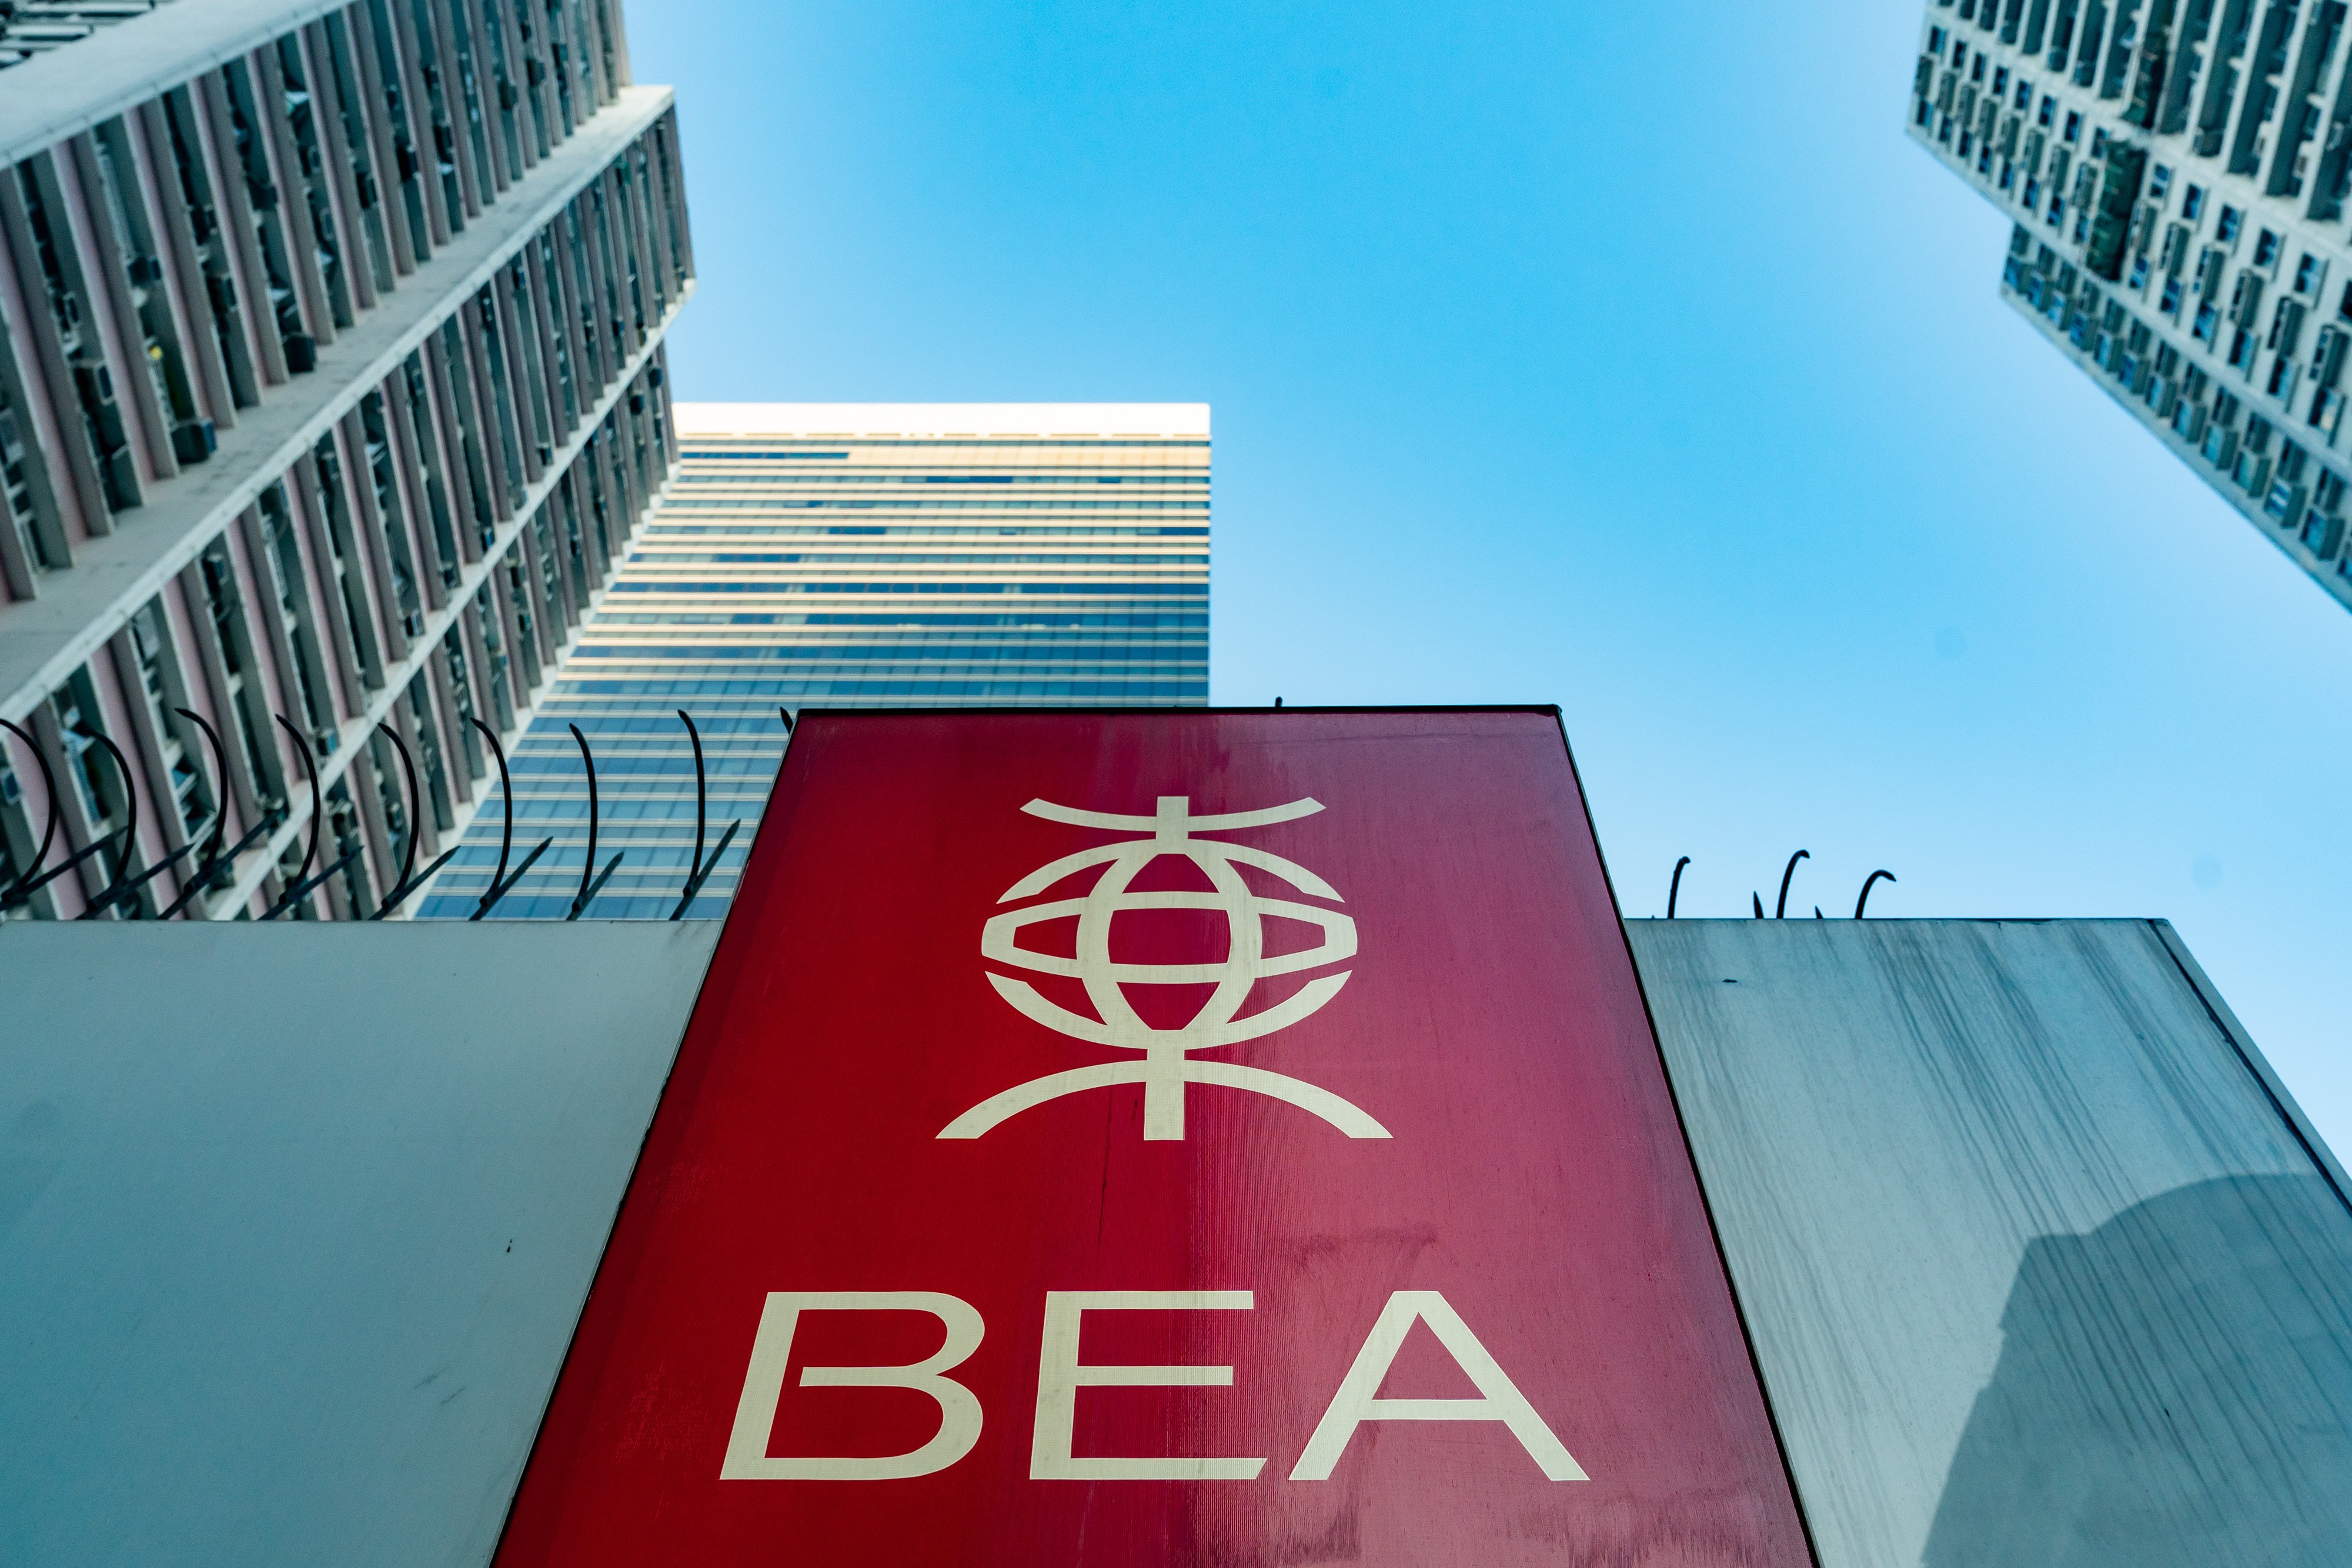 Bank of East Asia said the group faced multiple headwinds and challenges in its business environment in the first half. Photo: Bloomberg